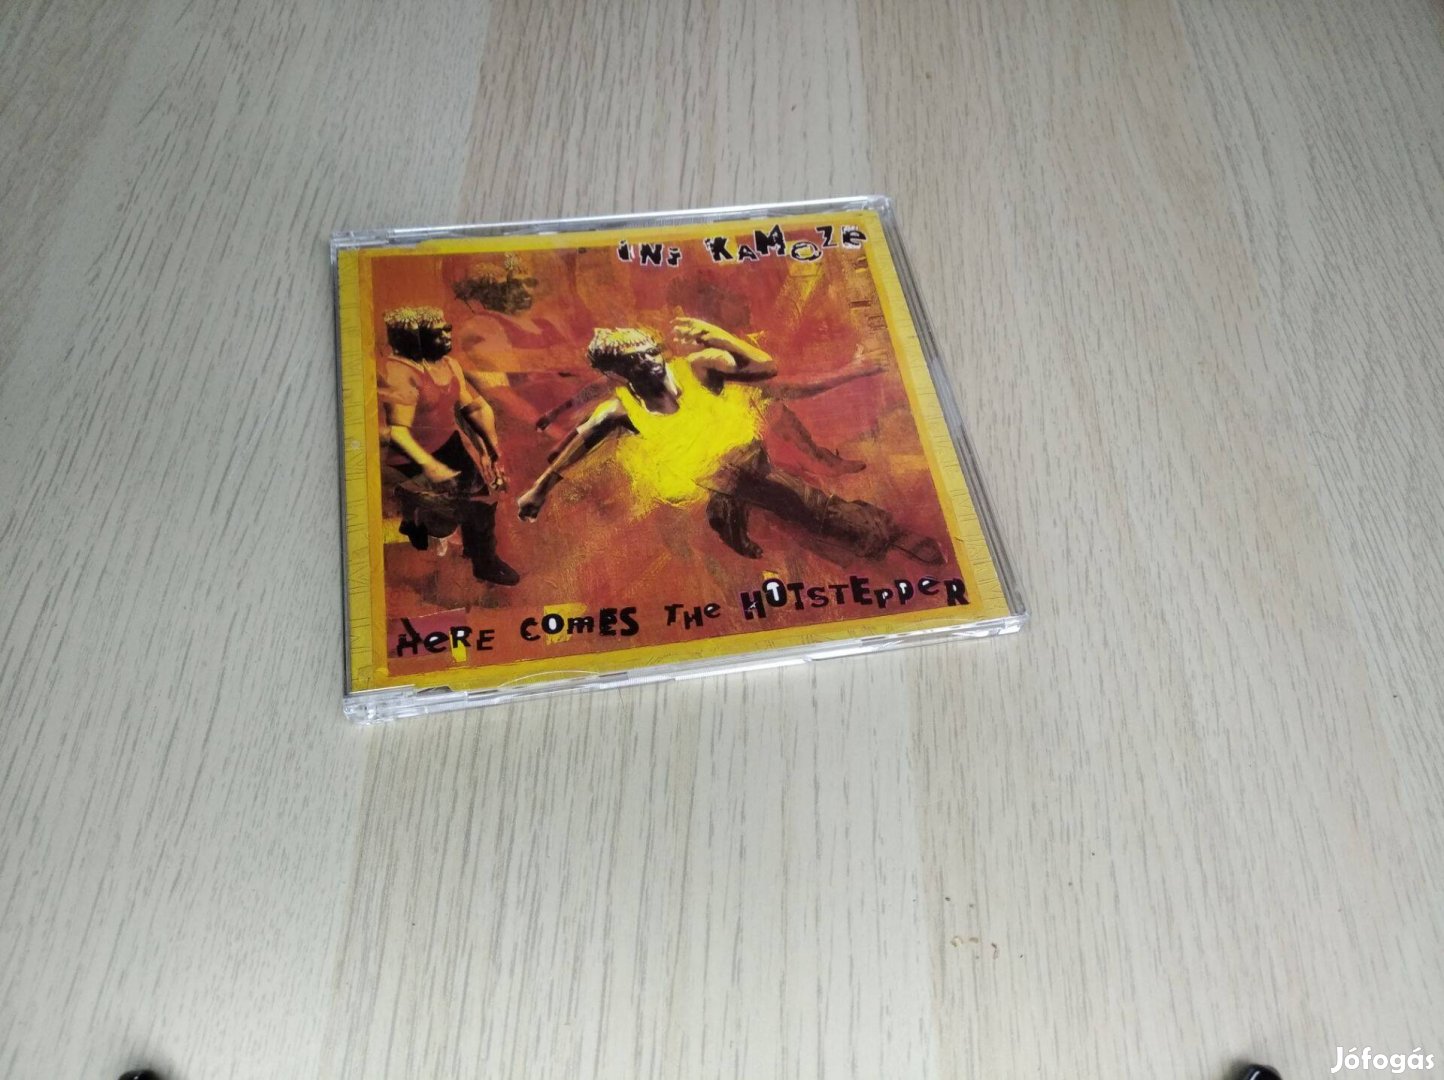 Ini Kamoze - Here Comes The Hotstepper / Maxi CD 1994